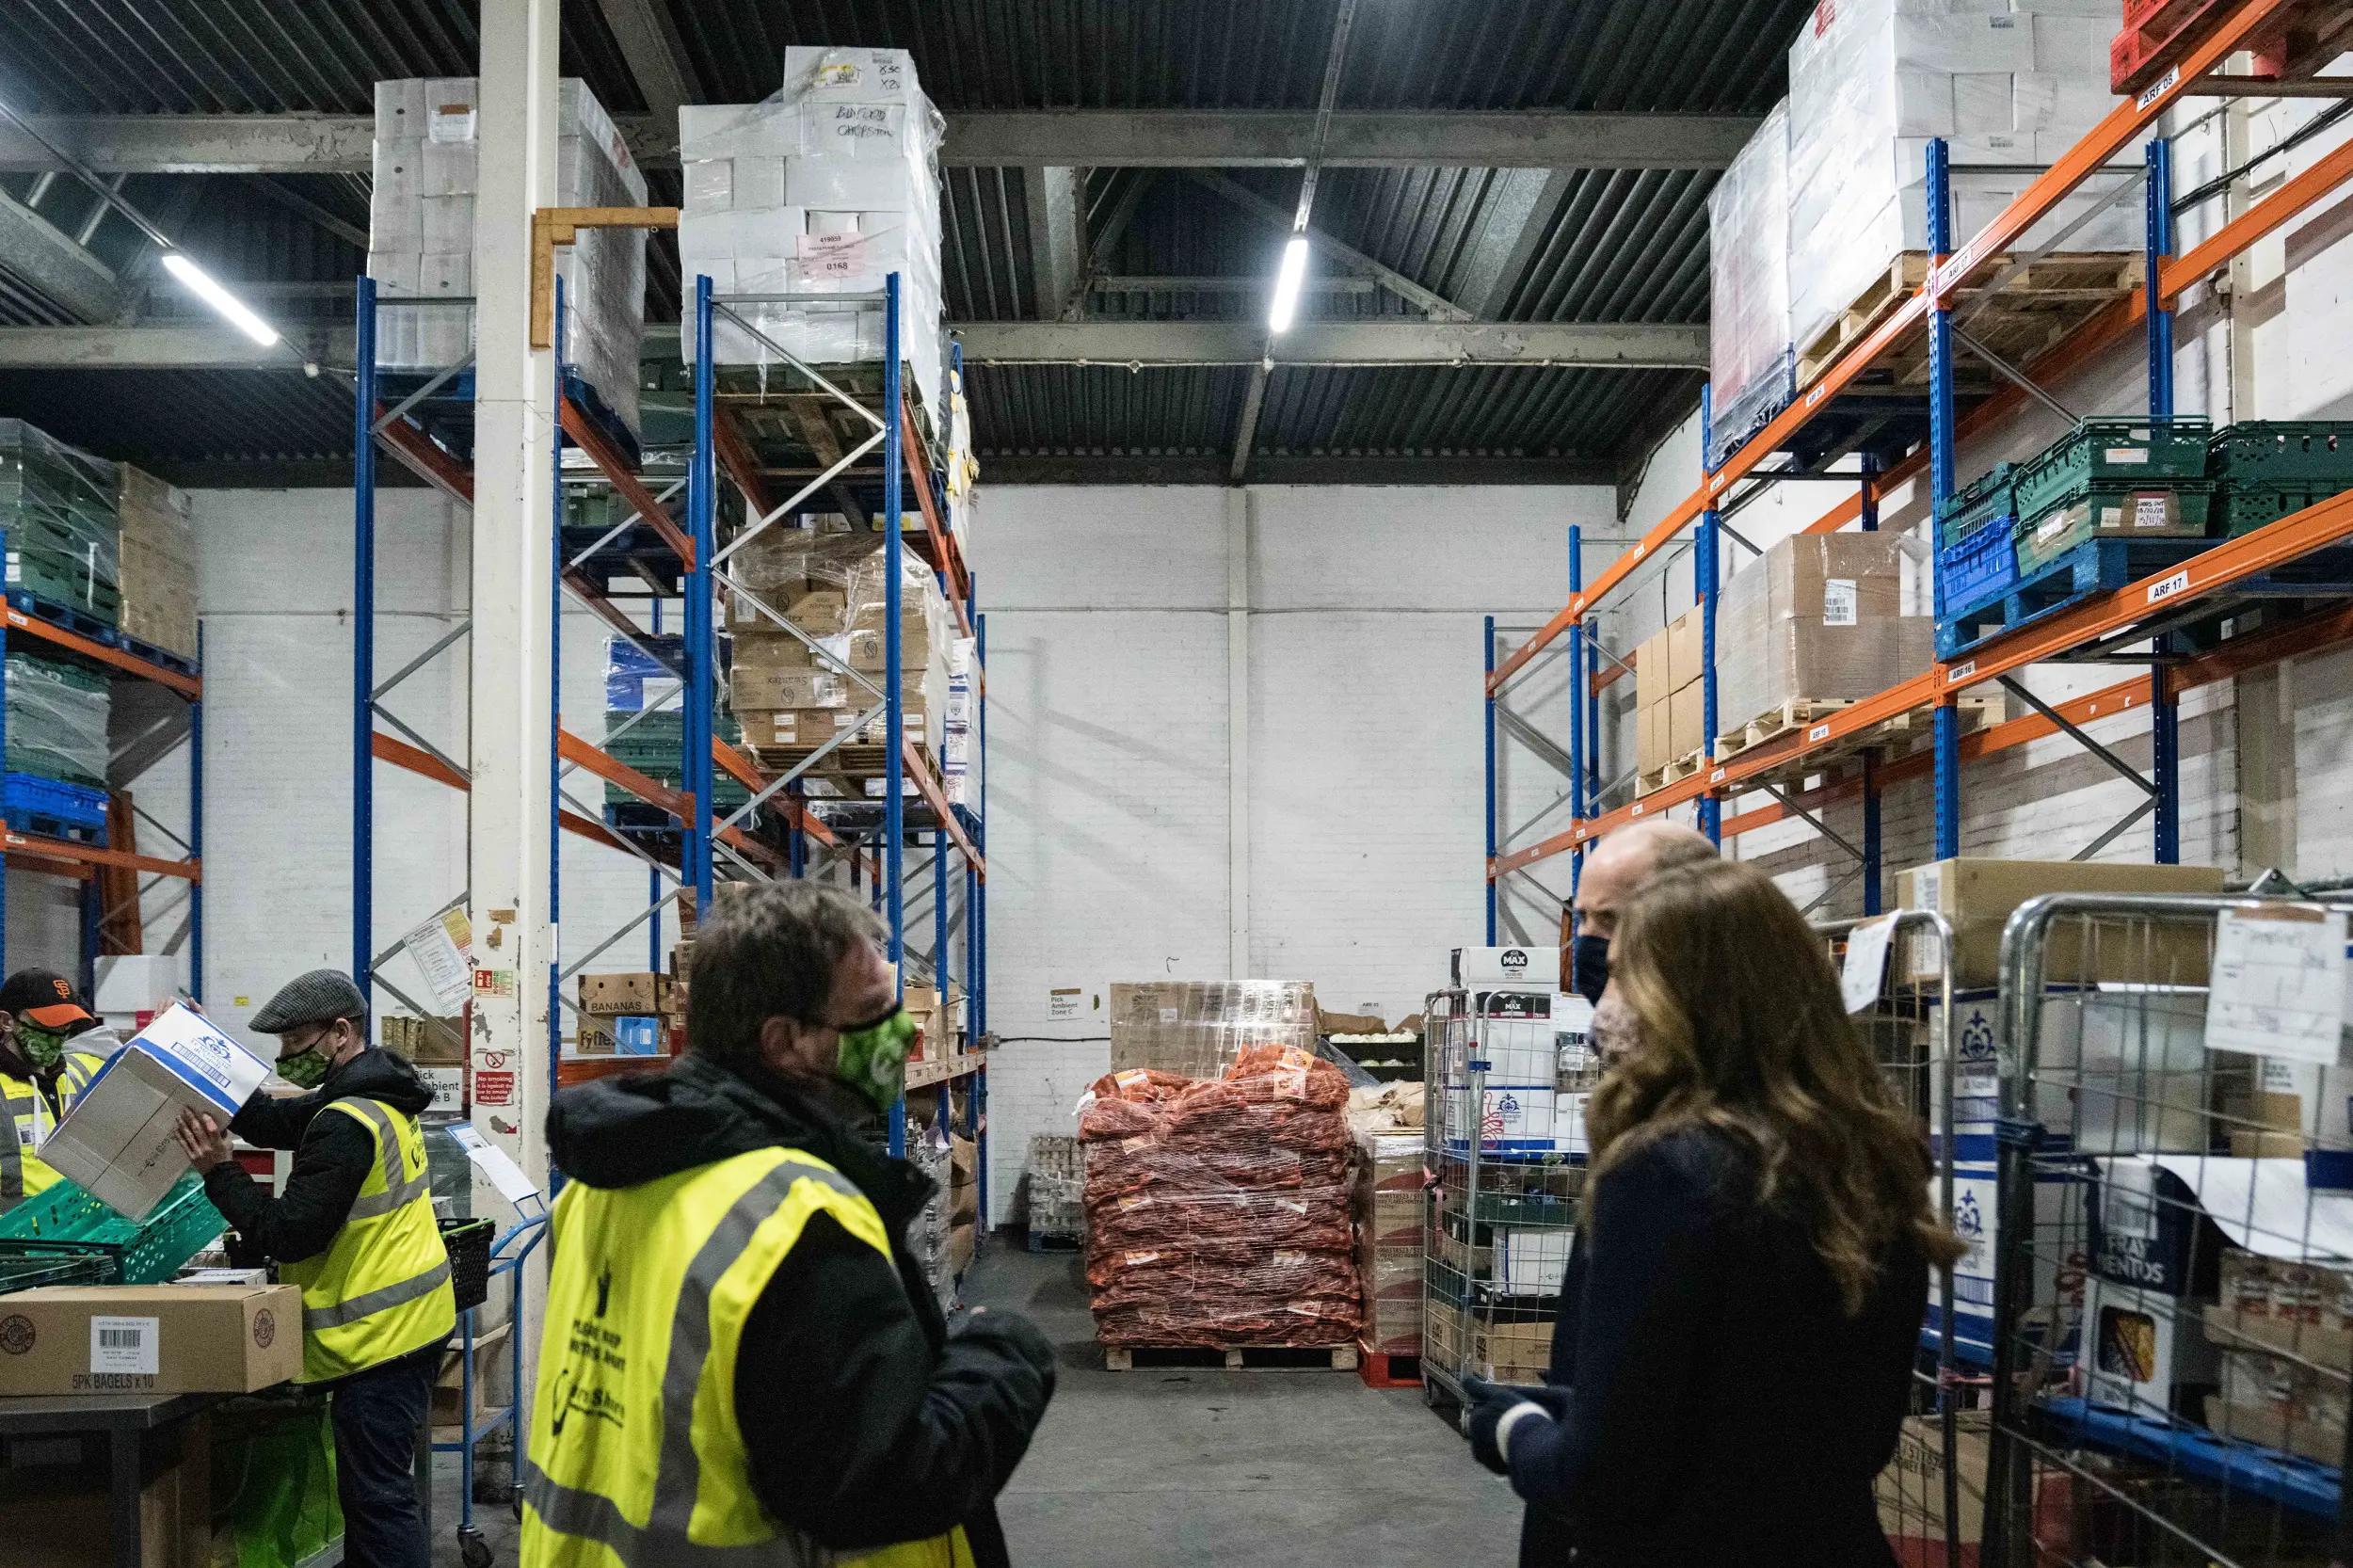 The Duke and Duchess of Cambridge visited FareShare a food charity in Manchster during Royal Train Tour